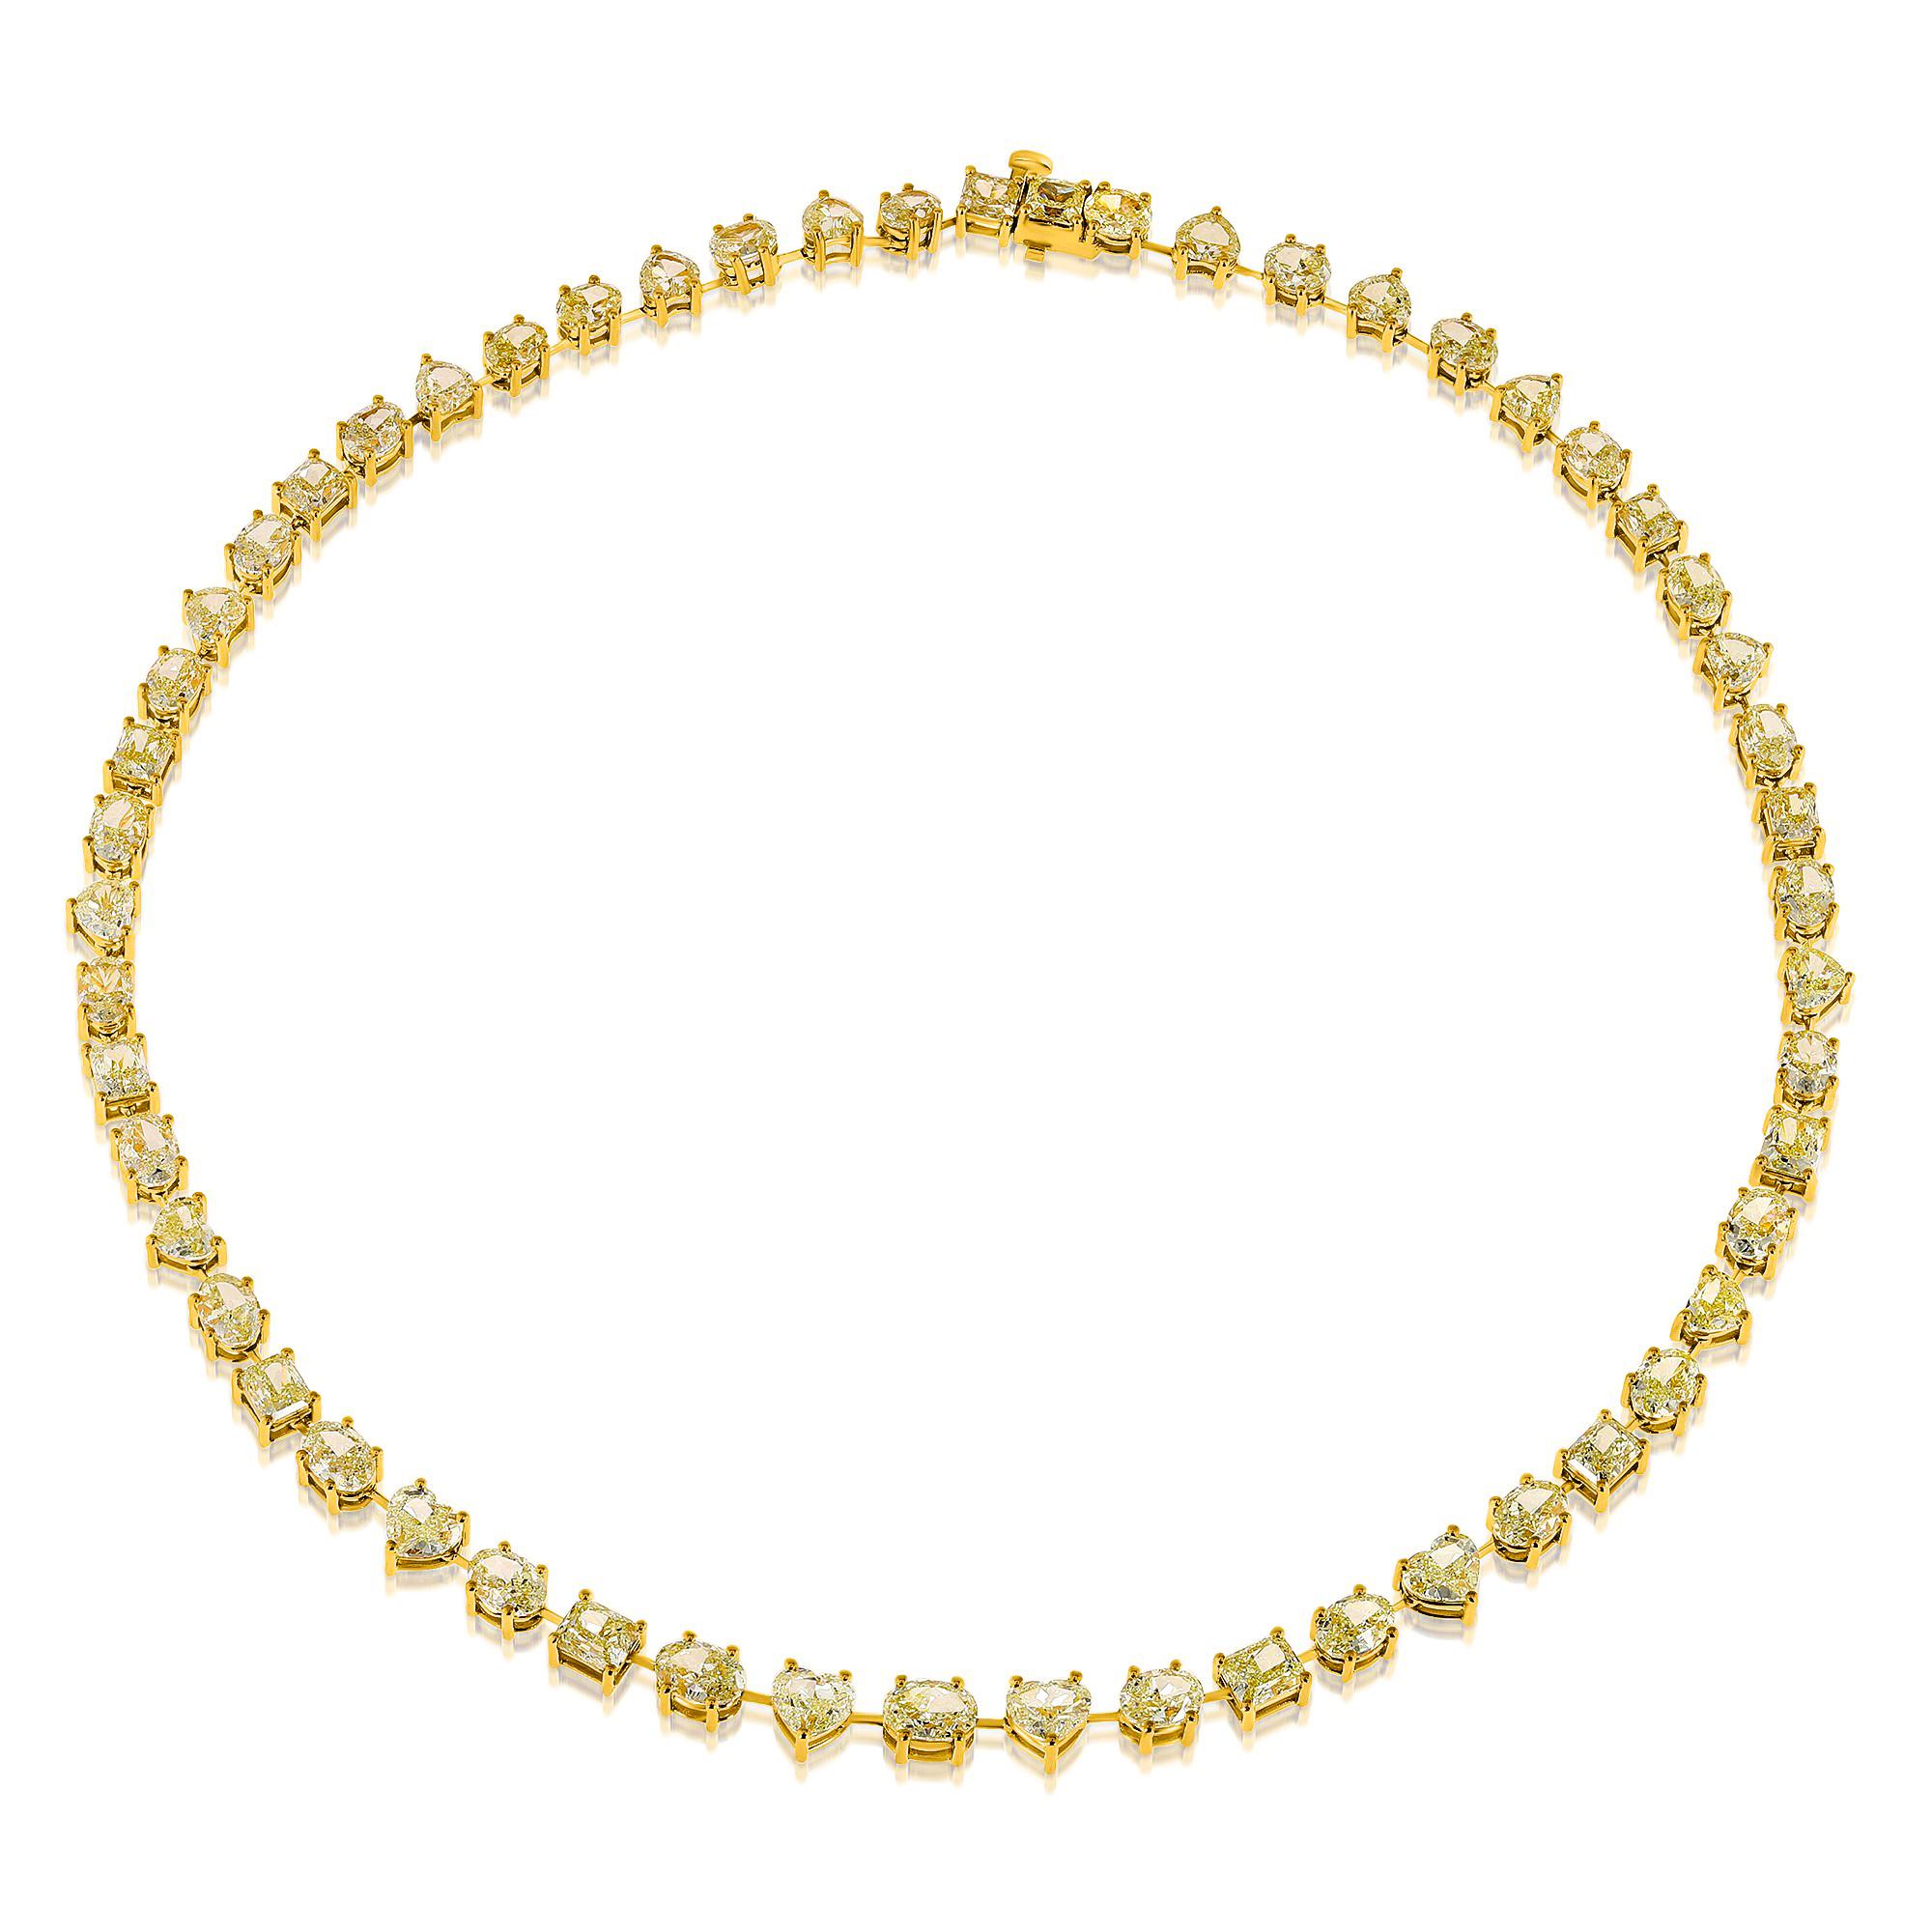 Introducing our extraordinary Mix-Shaped Cut Yellow Diamond tennis necklace, showcasing a stunning array of 56 yellow diamonds in heart-shaped, oval cut, and radiant shapes. These perfectly matched stones in color create a harmonious and captivating